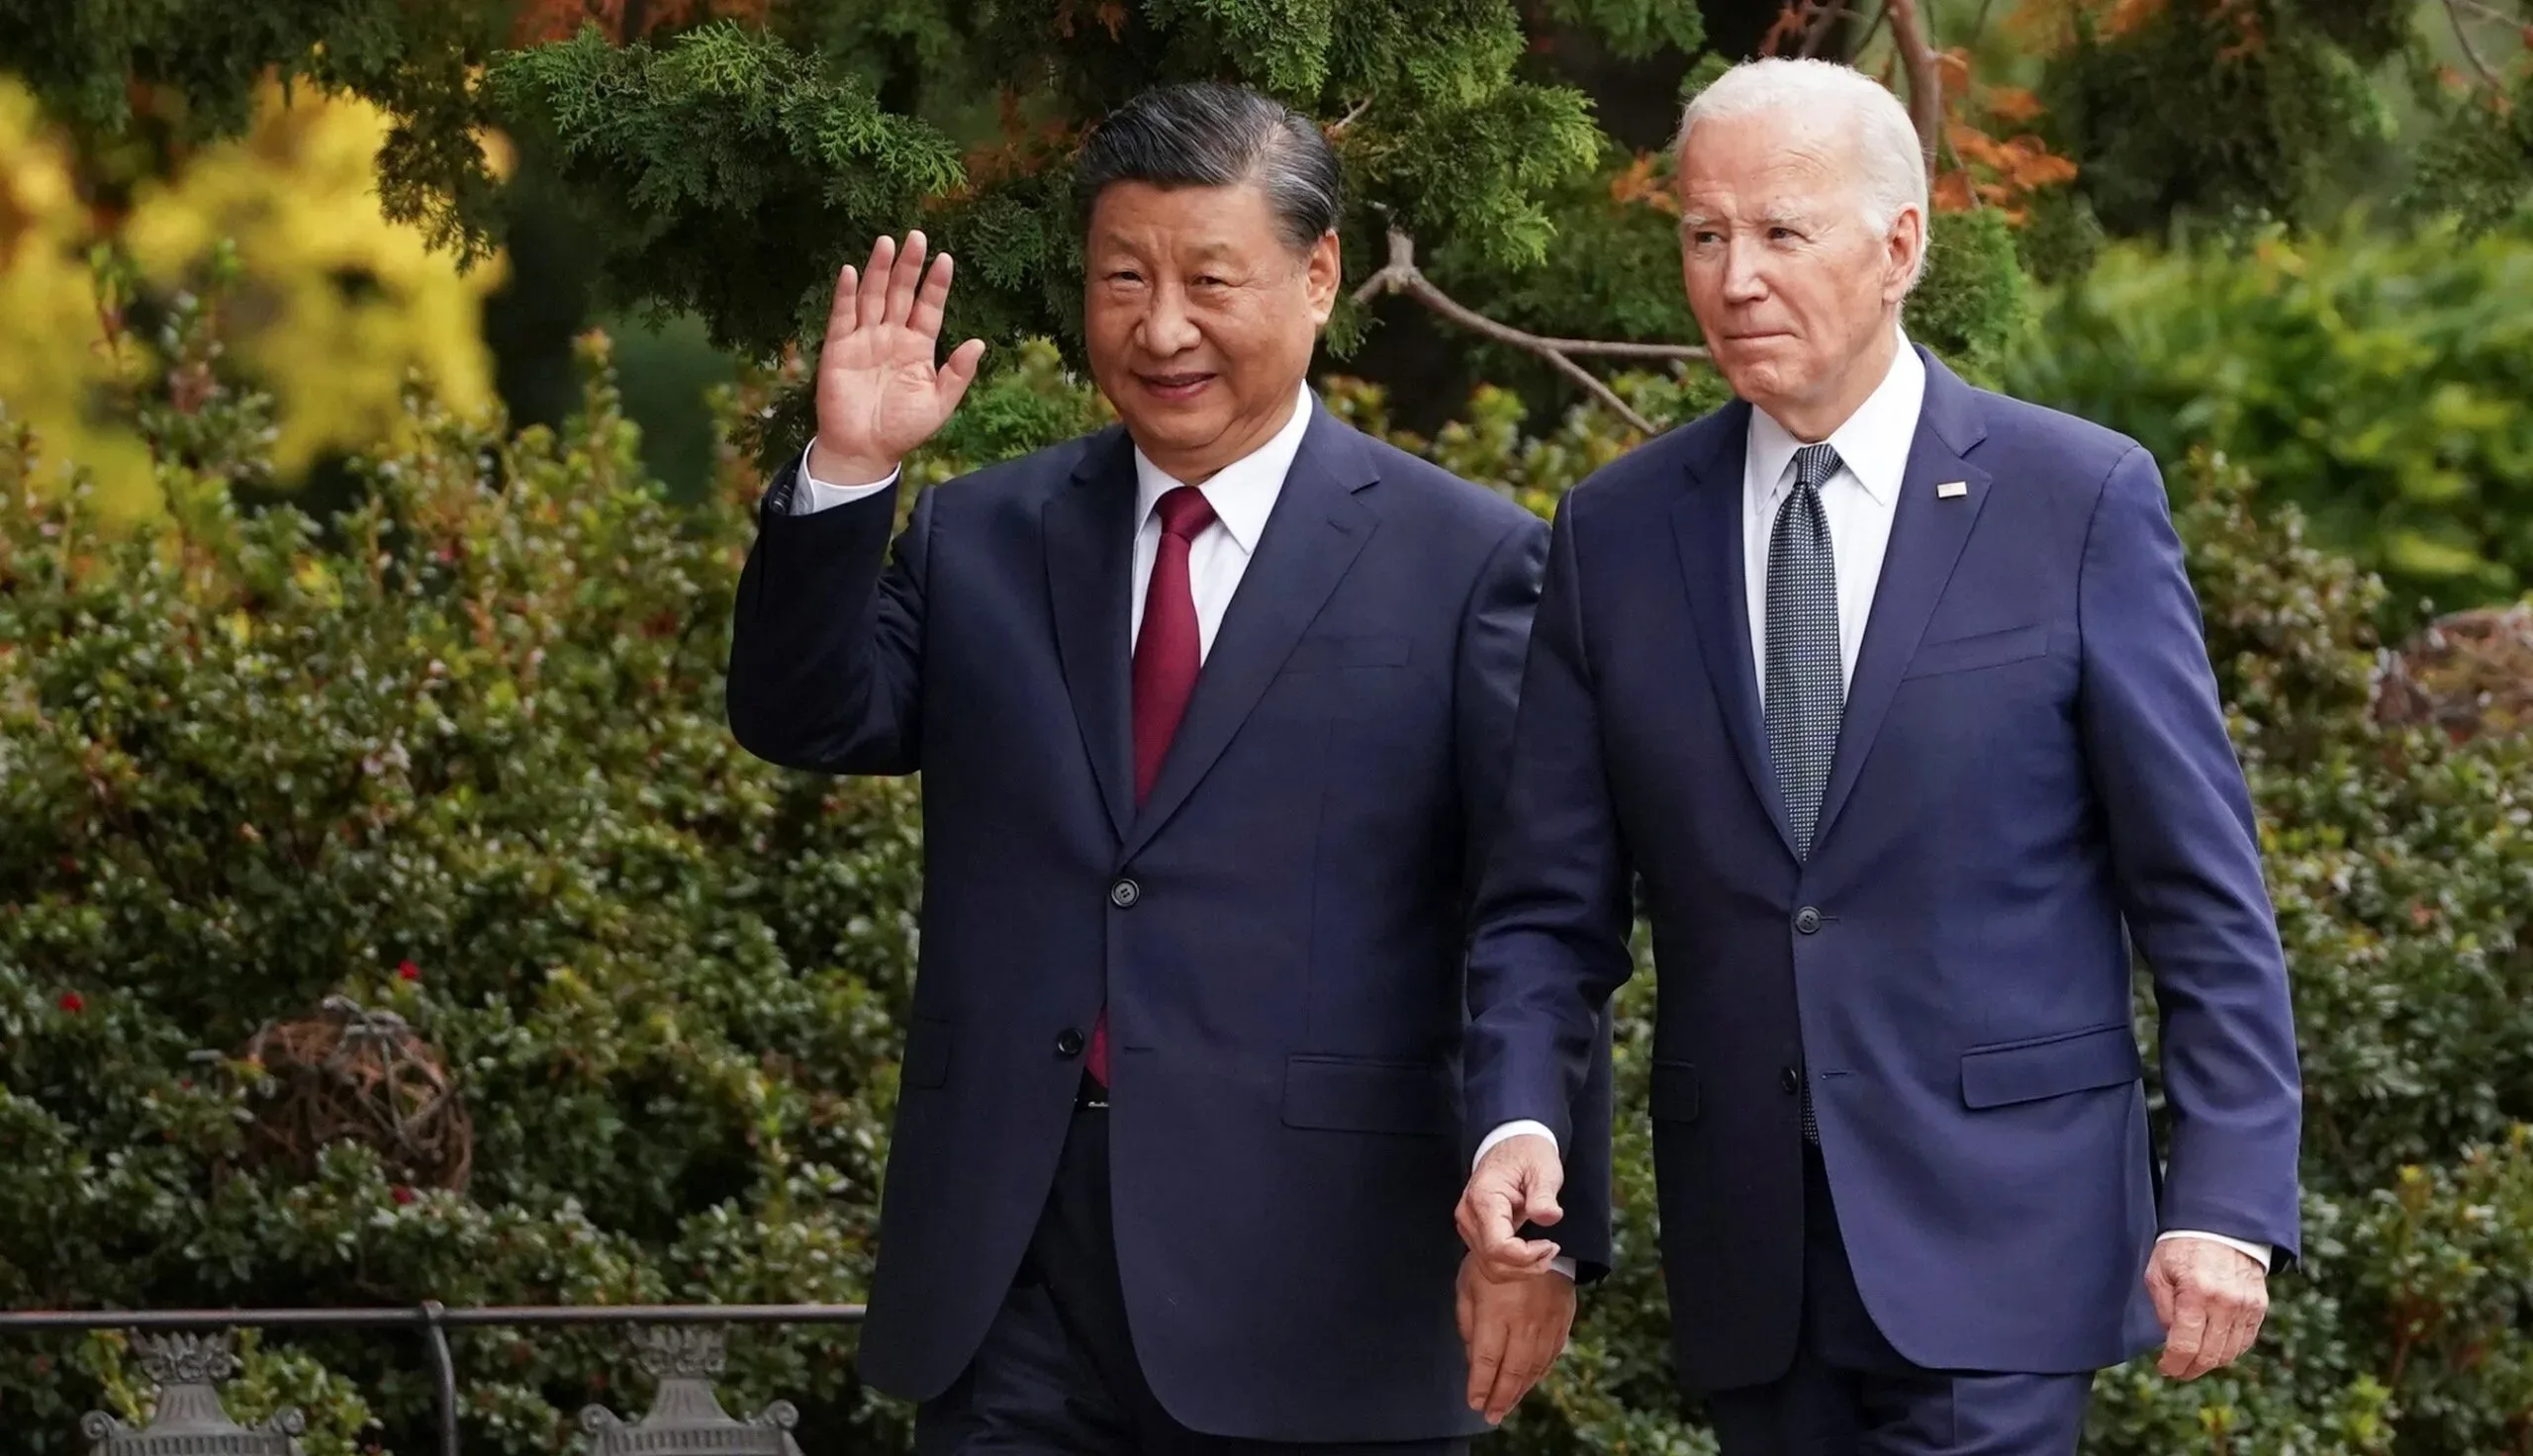 Biden and Xi Agree to Pick Up the Phone to Avert Crisis. But Now What?